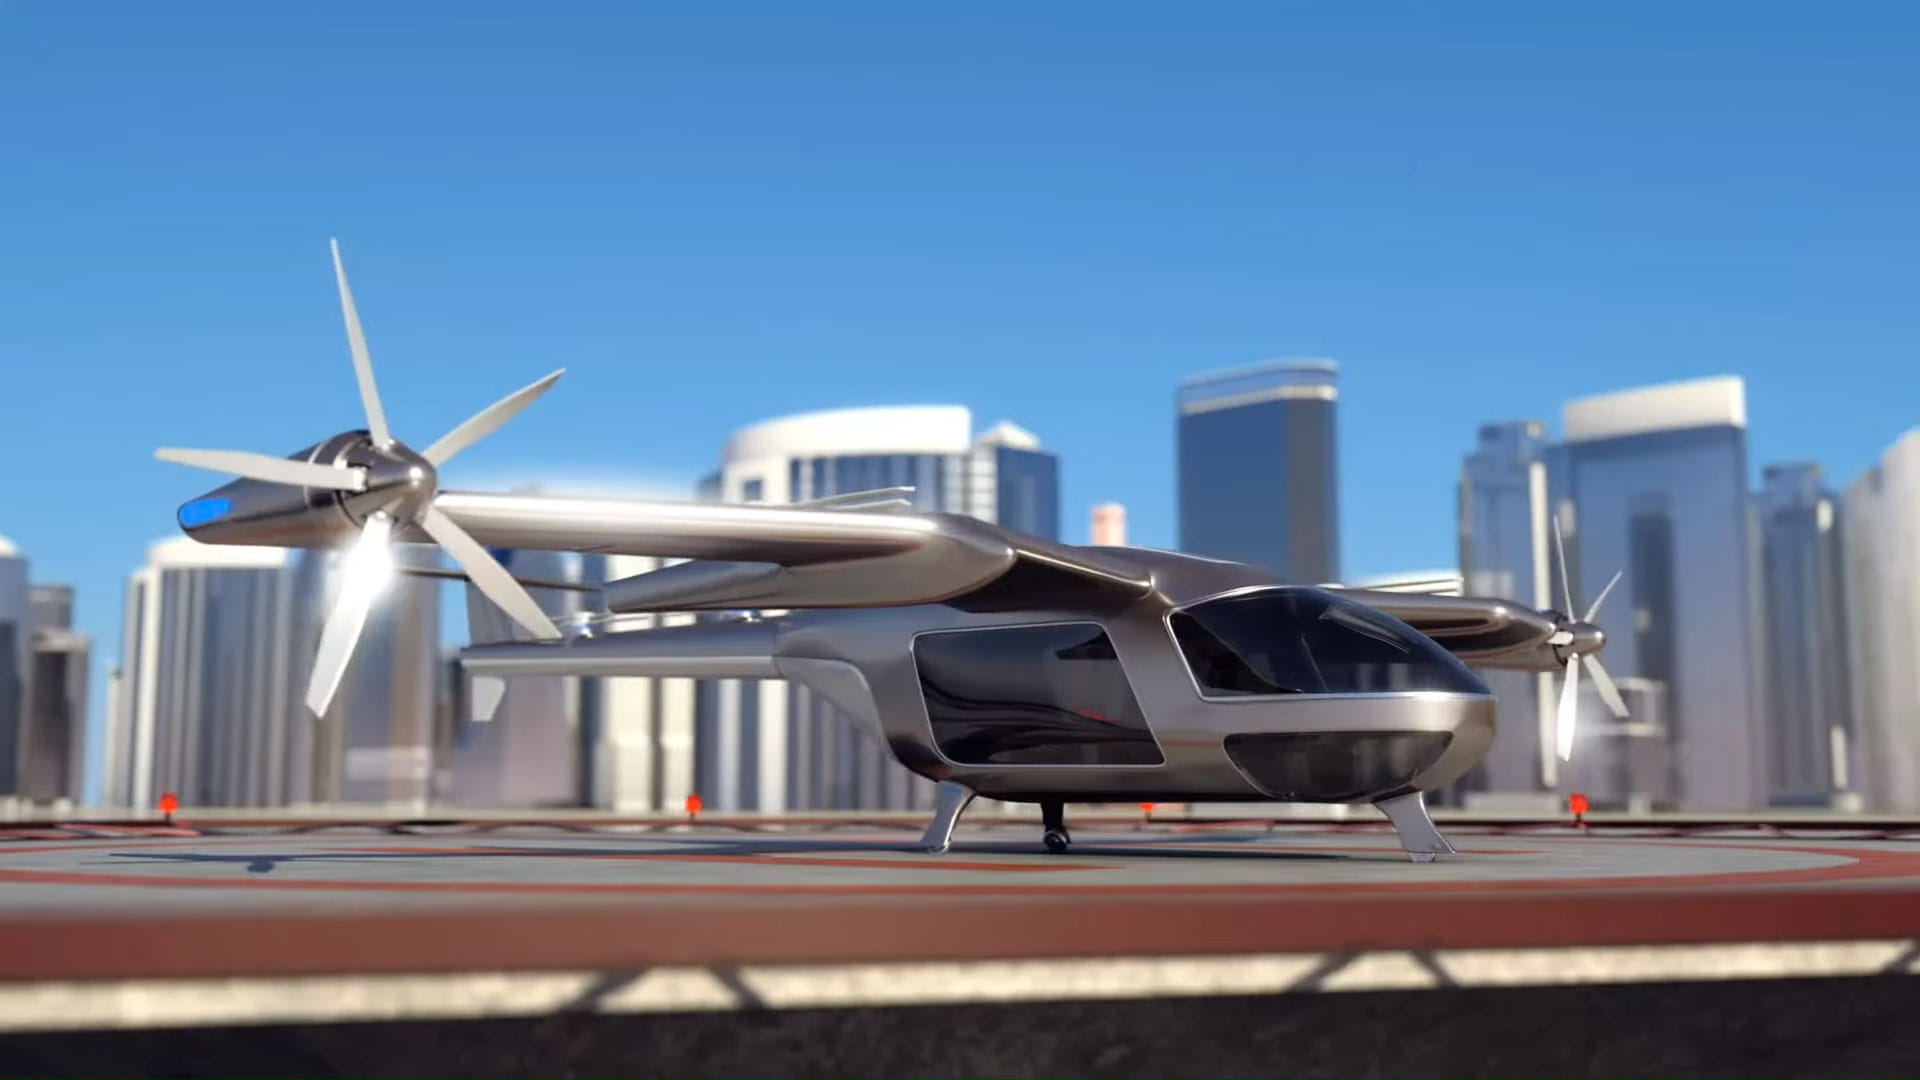 Computer rendering of a futuristic helicopter